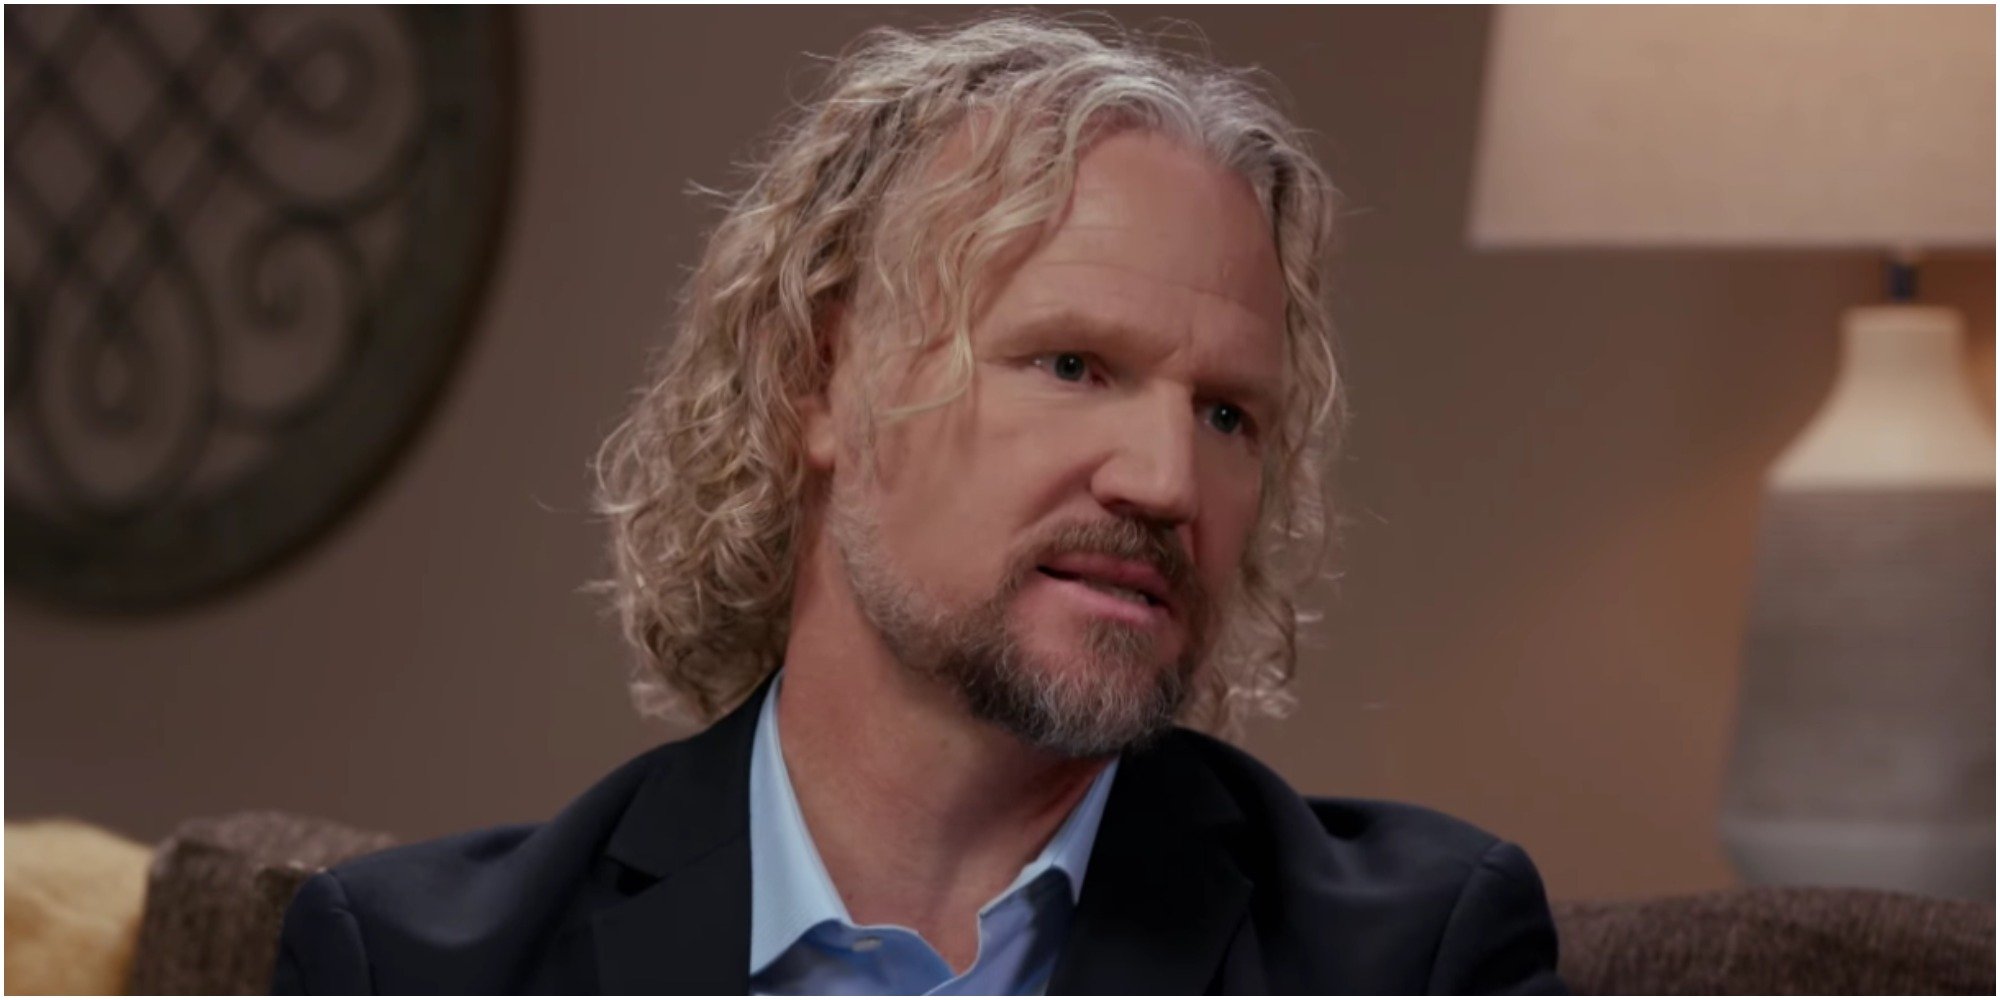 Kody Brown talks during the "Sister Wives" tell-all episode on TLC.